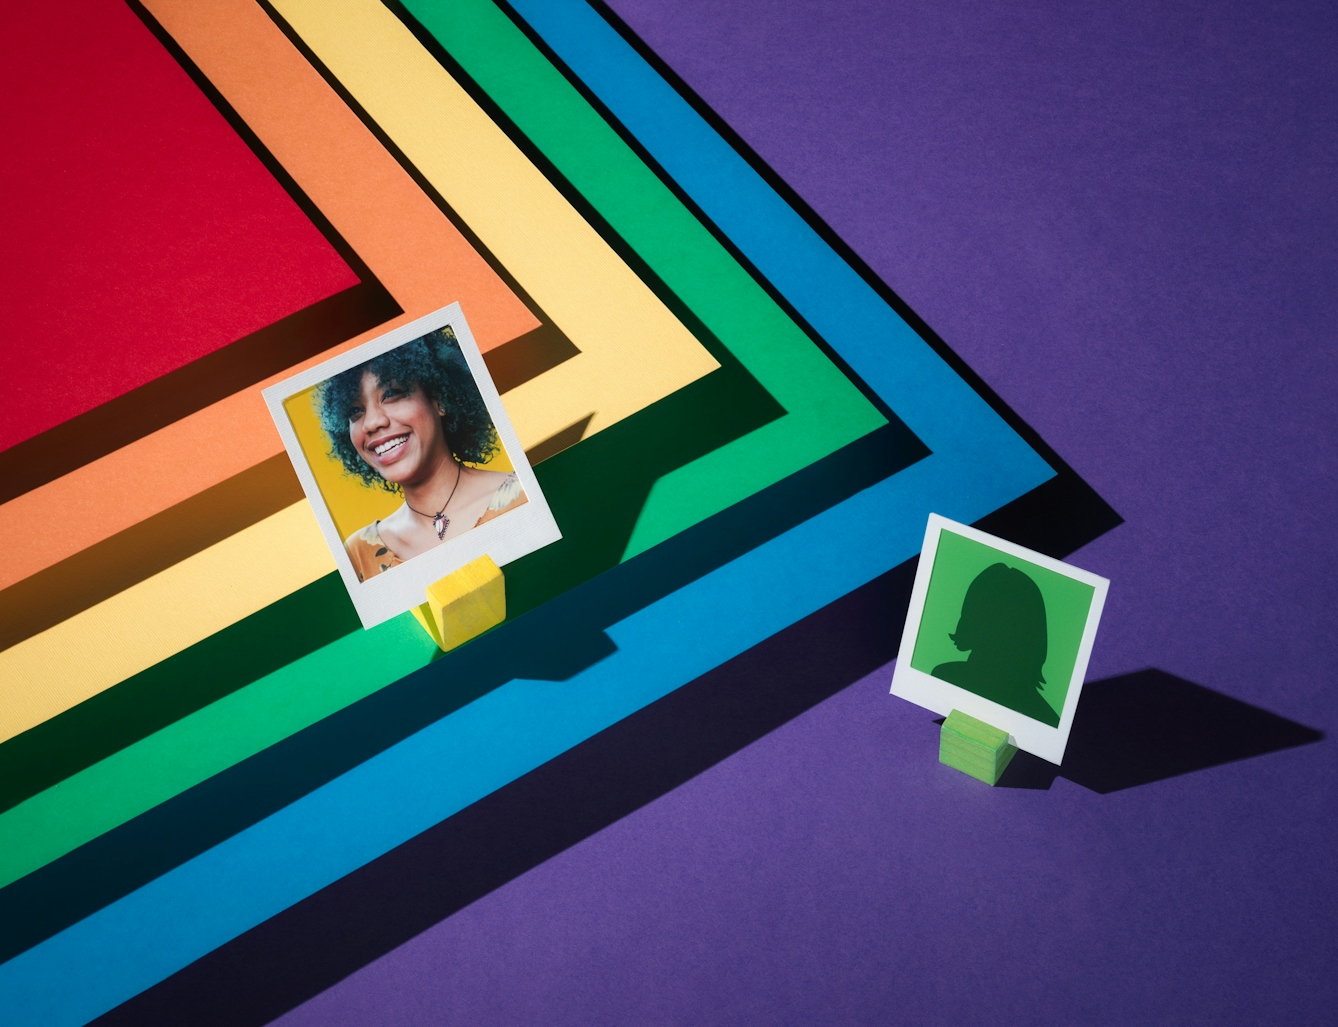 Photograph of a tiered set made up of the LGBTQ+ colours of red, orange, yellow, green, blue and purple.  The tiers form a chevron.  On the second tier, the green one, the portrait of a woman against a yellow background is framed in a small white frame.  Below this image, to the right, an anonymous figure on a green background is facing towards her.